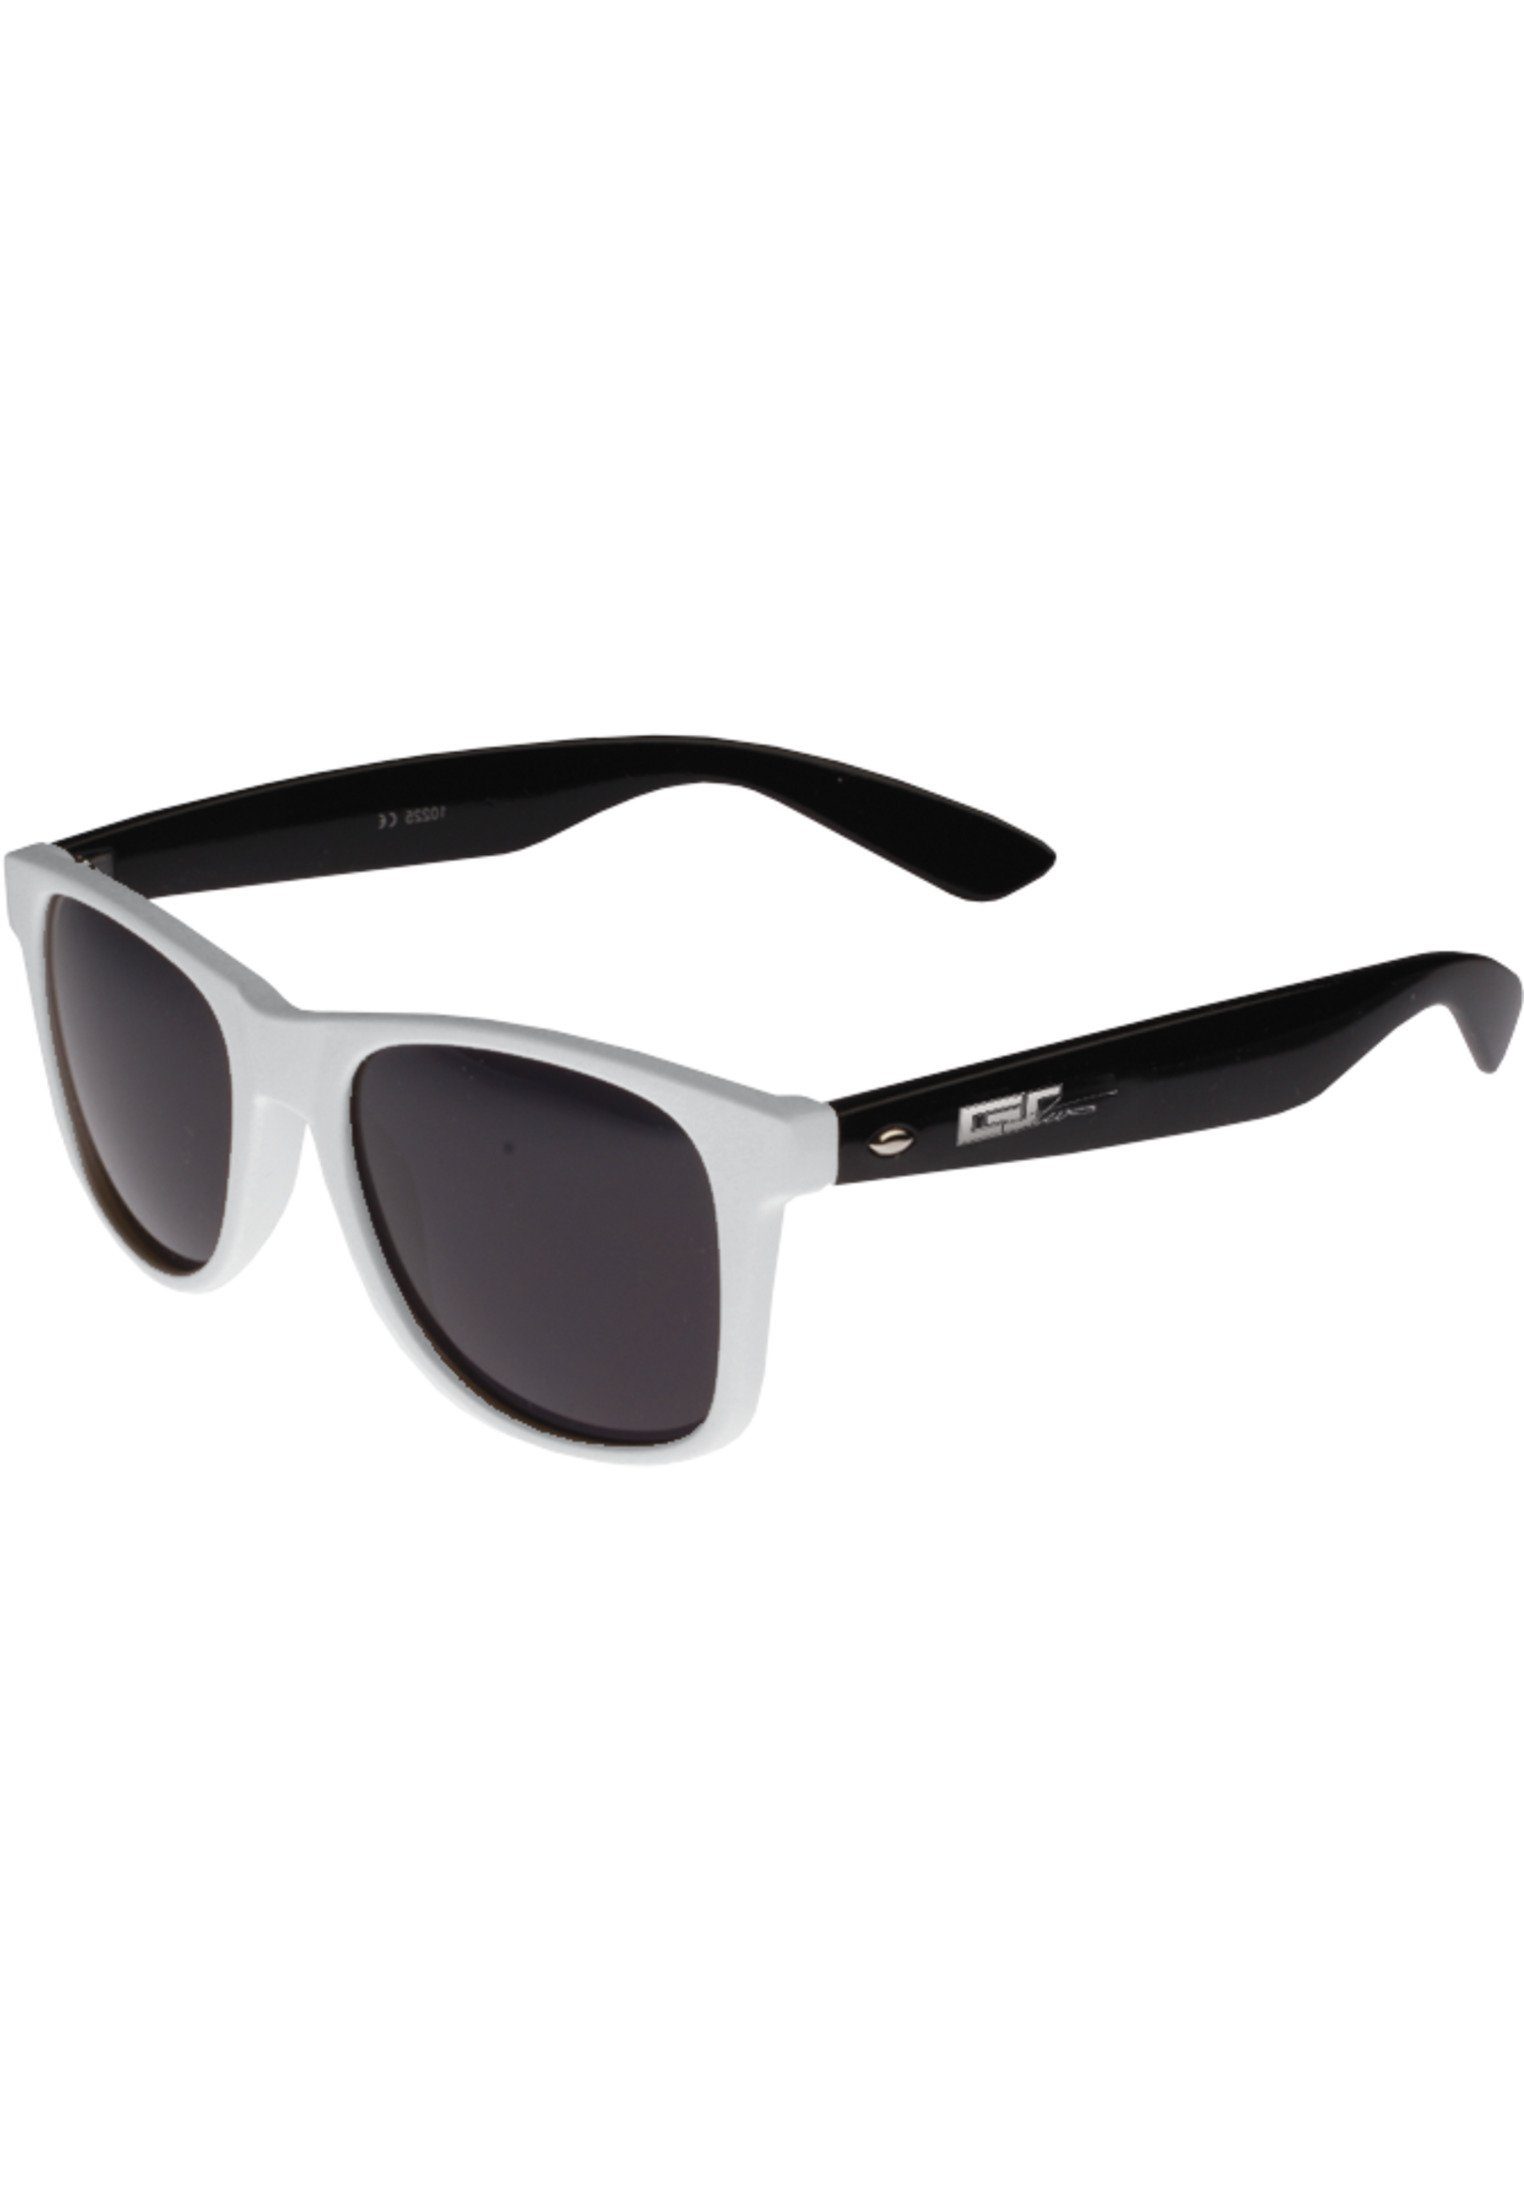 MSTRDS Sonnenbrille Accessoires Groove Shades GStwo white/black